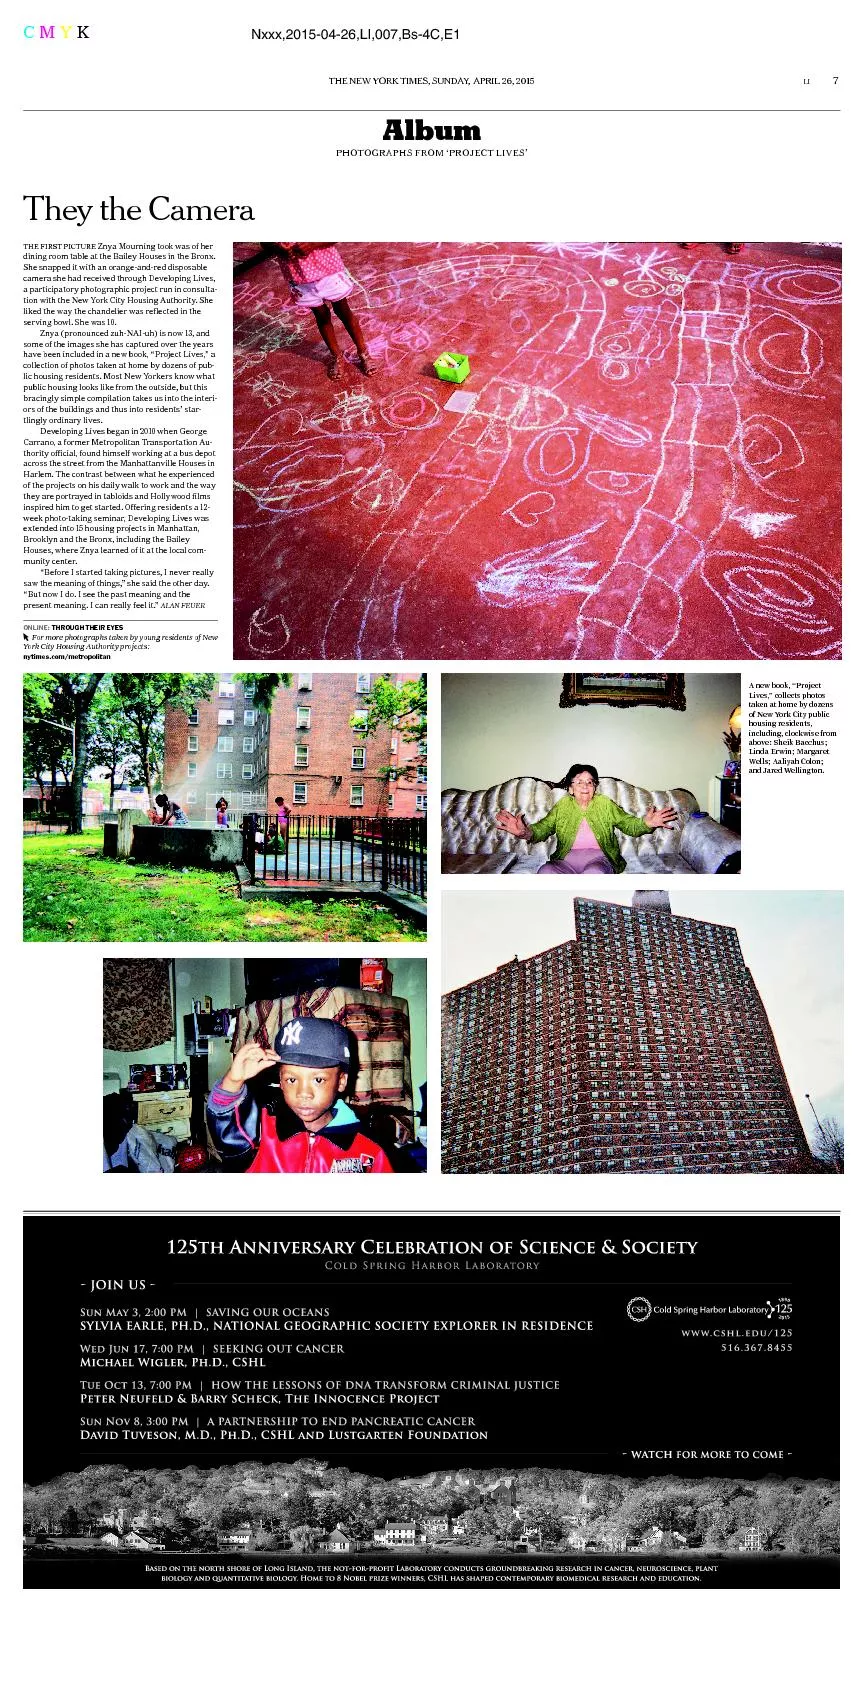 THE NEW YORK TIMES, SUNDAY,APRIL26, 2015THE FIRST PICTUREZnya Mourning